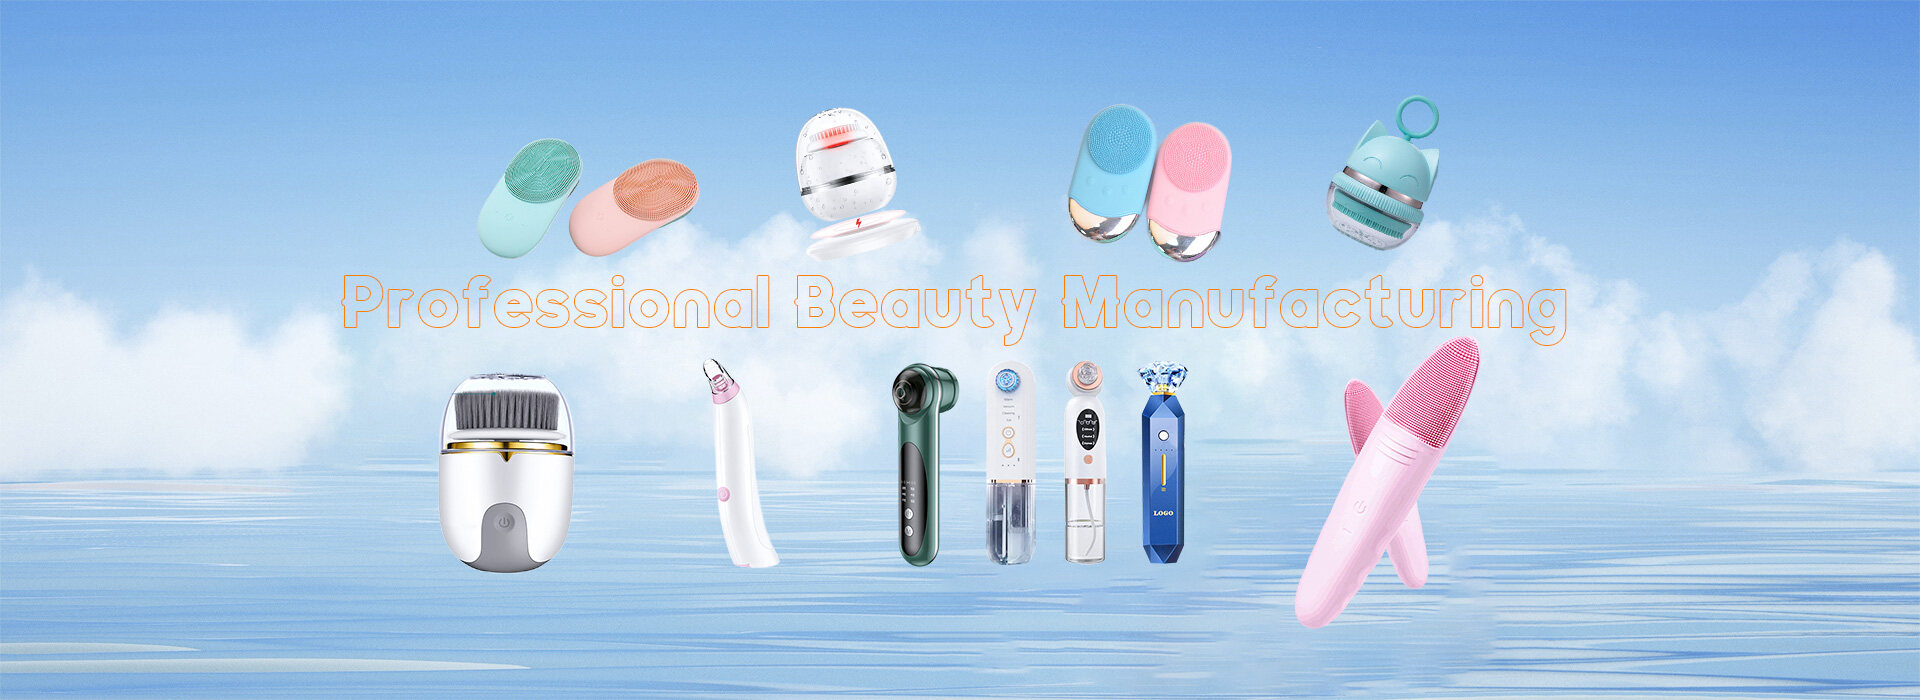 Mini Portable Painless Underarm Facial Full Body Machine Permanent Painless Flash IPL Epilator Laser Hair Removal,Professional Portable Permanent Skin Facial Women's Laser IPL Hair Removal At Home,Home Use Portable Body Multifunction Painless Quartz Tube Skin Lady Handheld Professional Flashes Mini Ipl Laser Hair Removal,OEM/ODM Slim Detoxification Body Shaper Far Infrared 3 Zones Sauna Blanket For Weight Loss And Detox